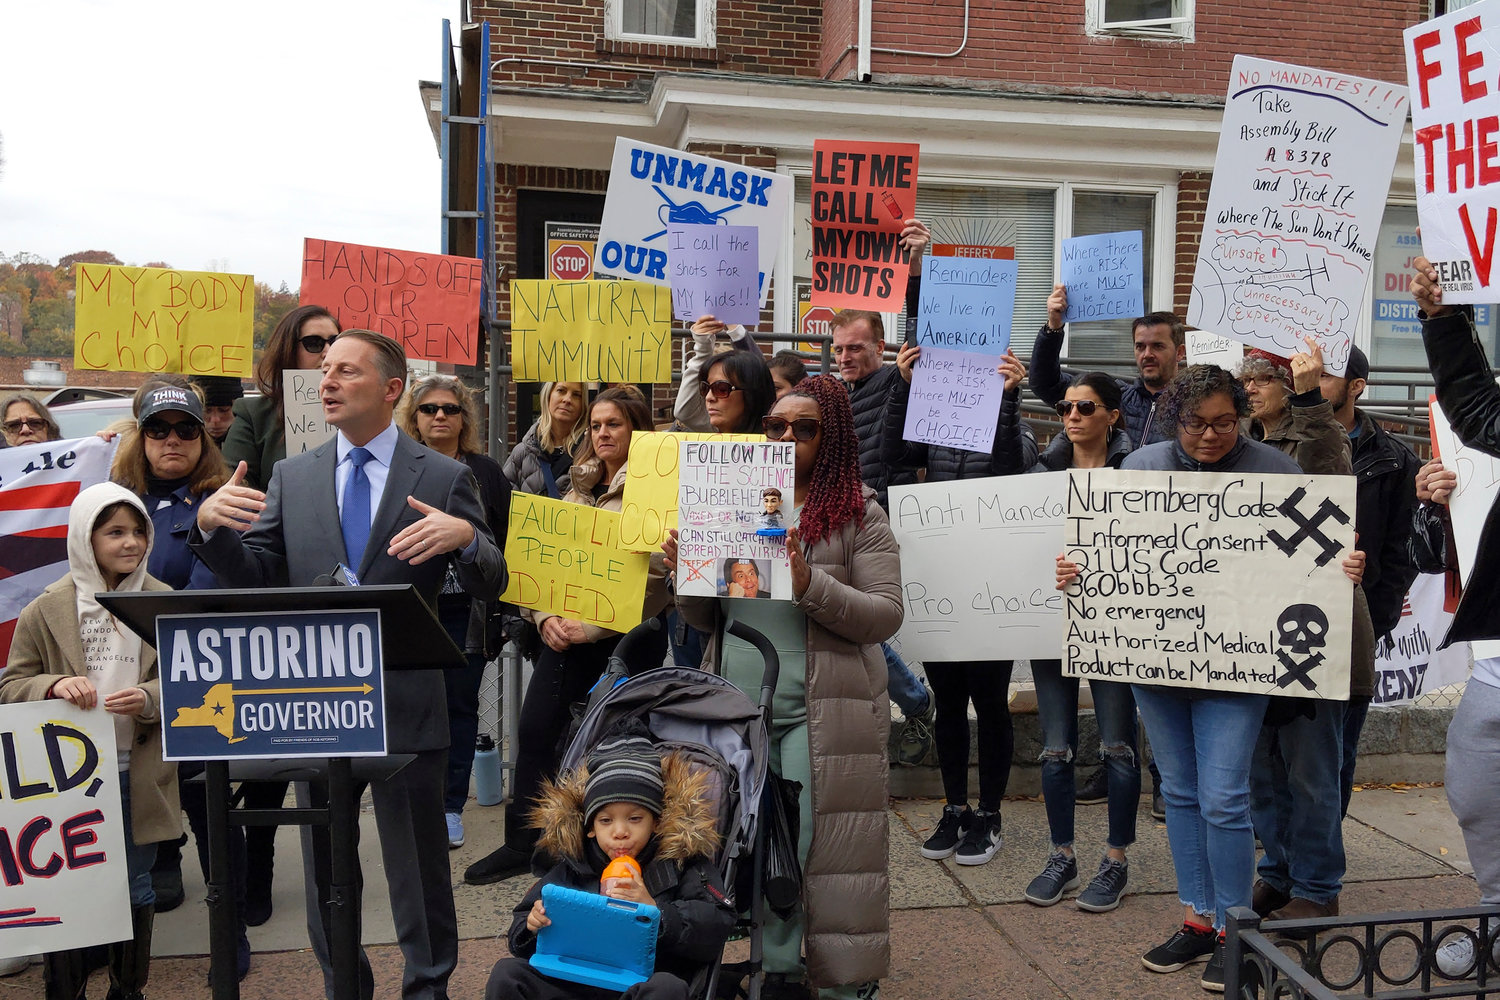 Republican gubernatorial candidate and former Westchester County executive Rob Astorino rallied against Assemblyman Jeffrey Dinowitz’s child vaccine mandate outside the lawmaker’s Kingsbridge Avenue office earlier this month. Cameras caught two protesters displaying what has been described as anti-Semitic imagery during the rally — a swastika emblazoned on a sign, and a man wearing a gold Star of David patch.